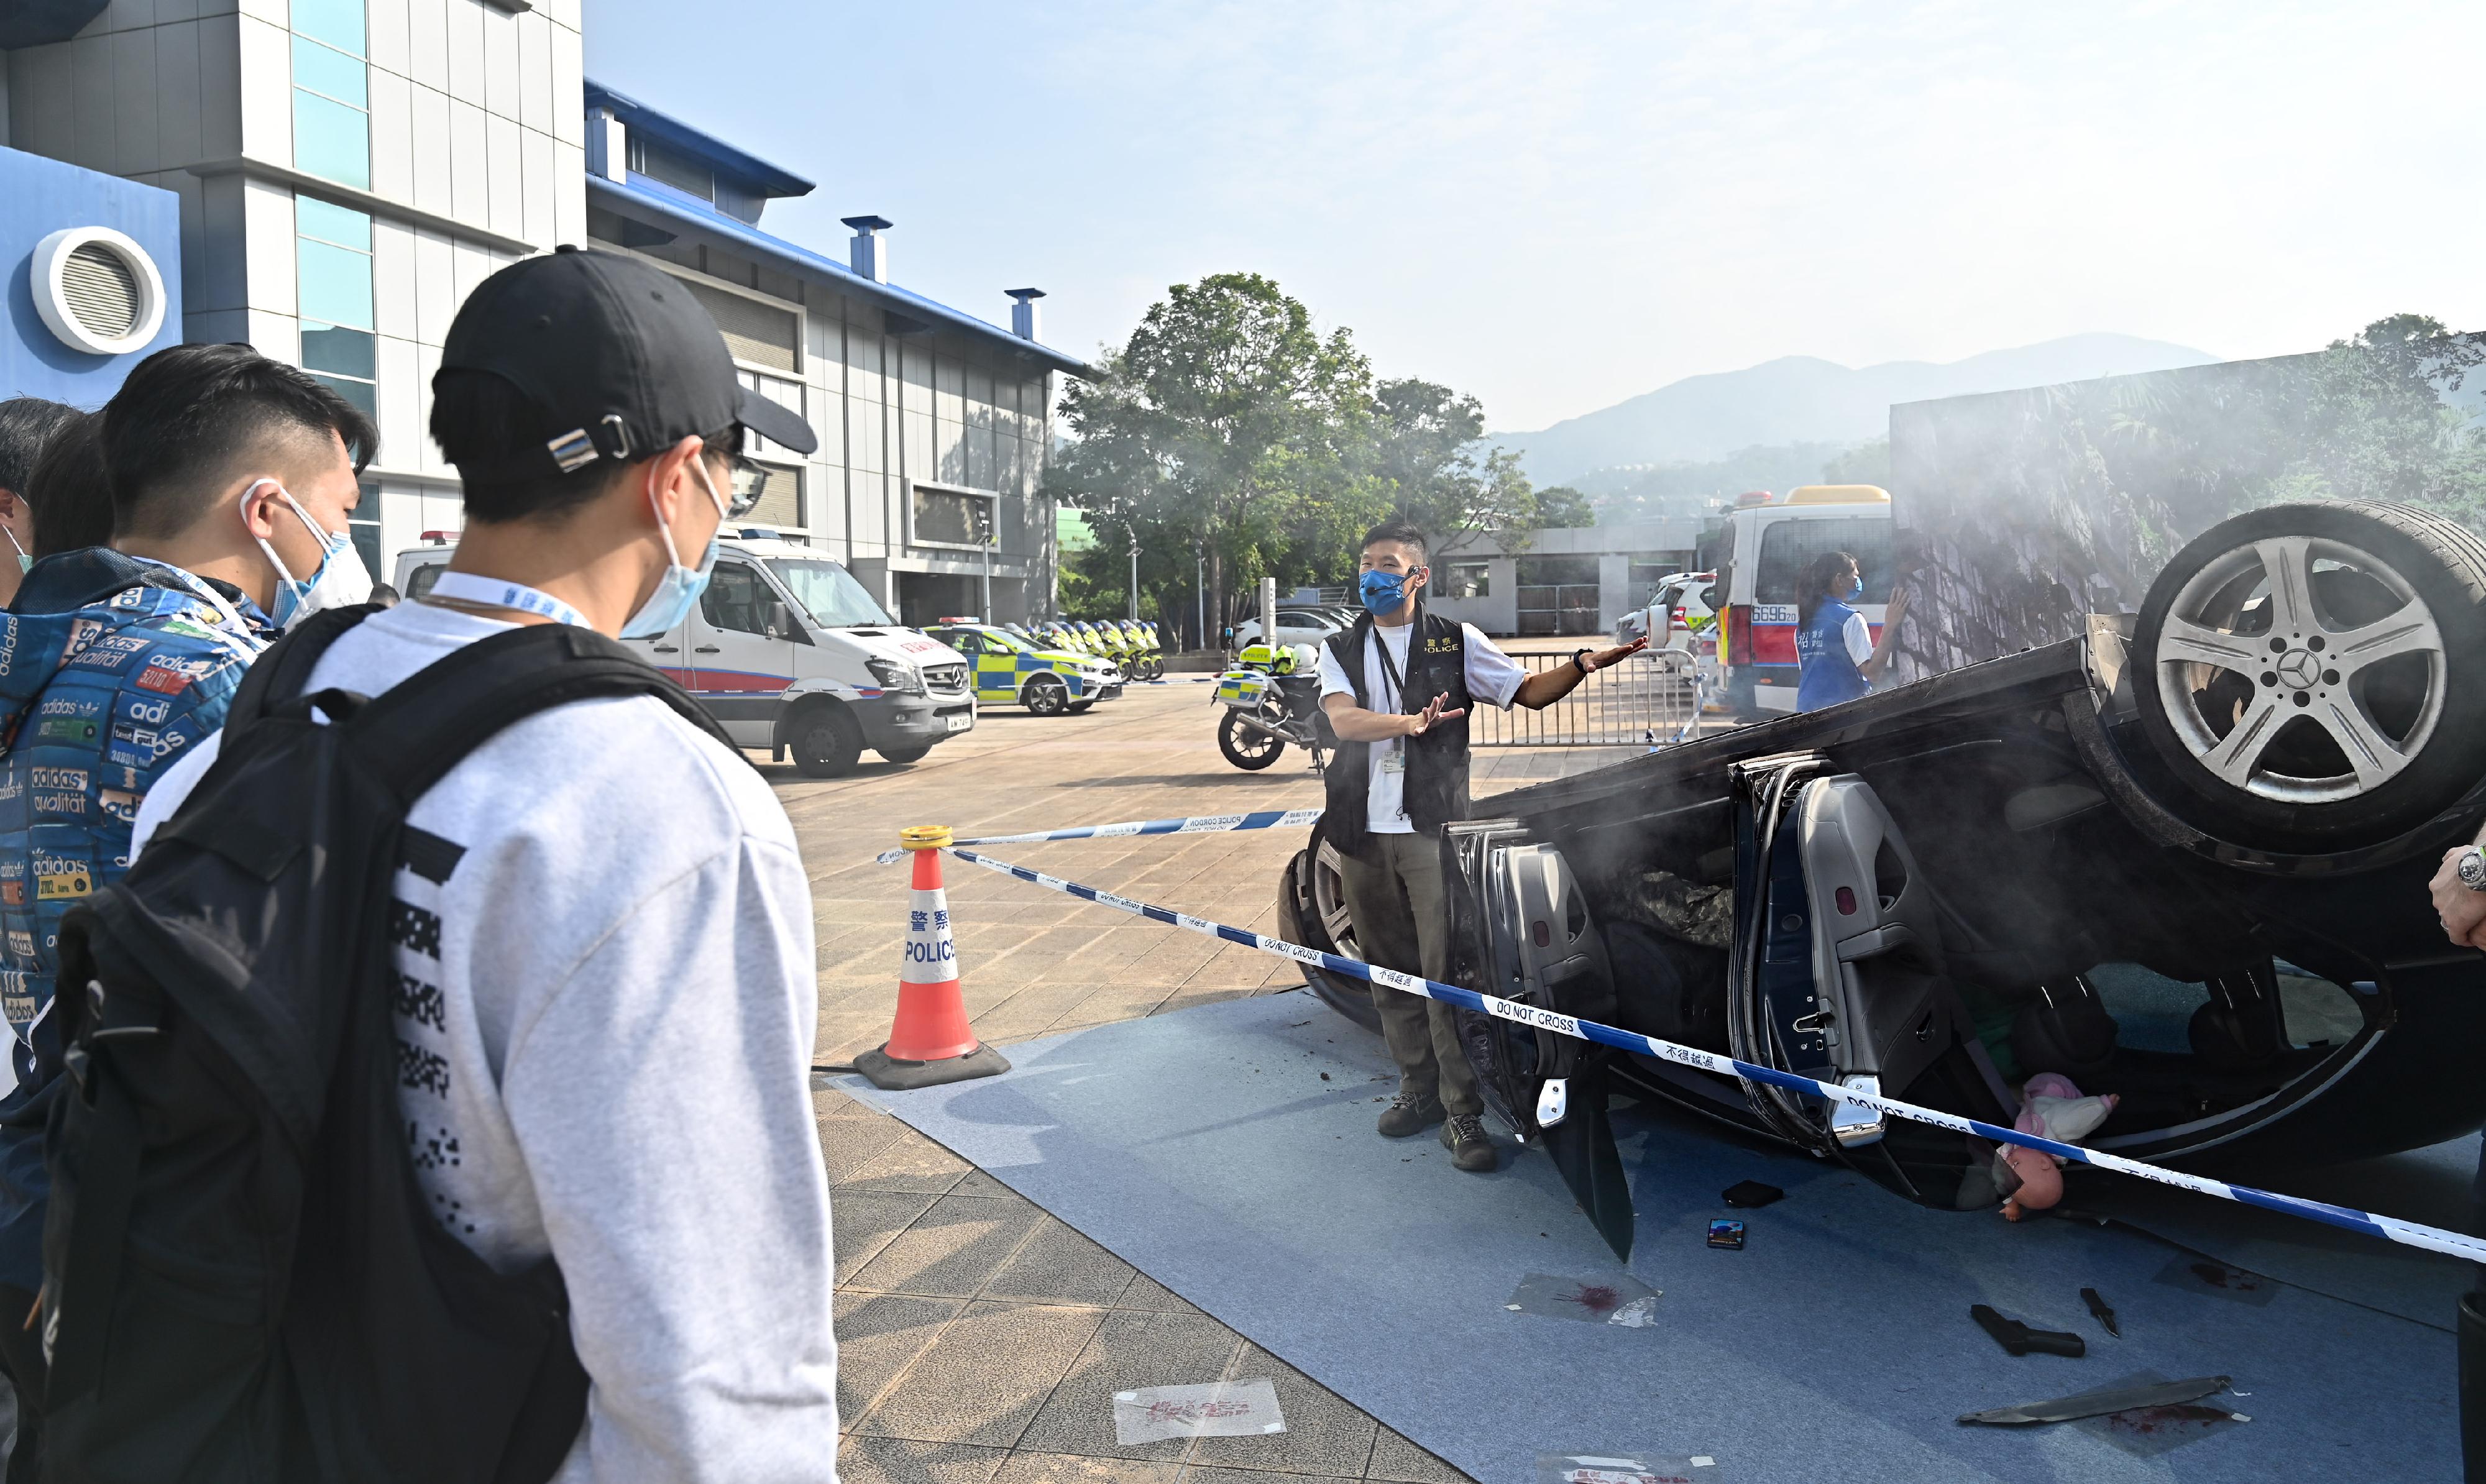 The Hong Kong Police Force today (November 20) organised the Police Recruitment Experience and Assessment Day at the Hong Kong Police College. Photo shows visitors participating in the "Interactive Theatre", to experience the role of various Police units in protecting the lives and properties of the public through handling a case in a simulated traffic accident.